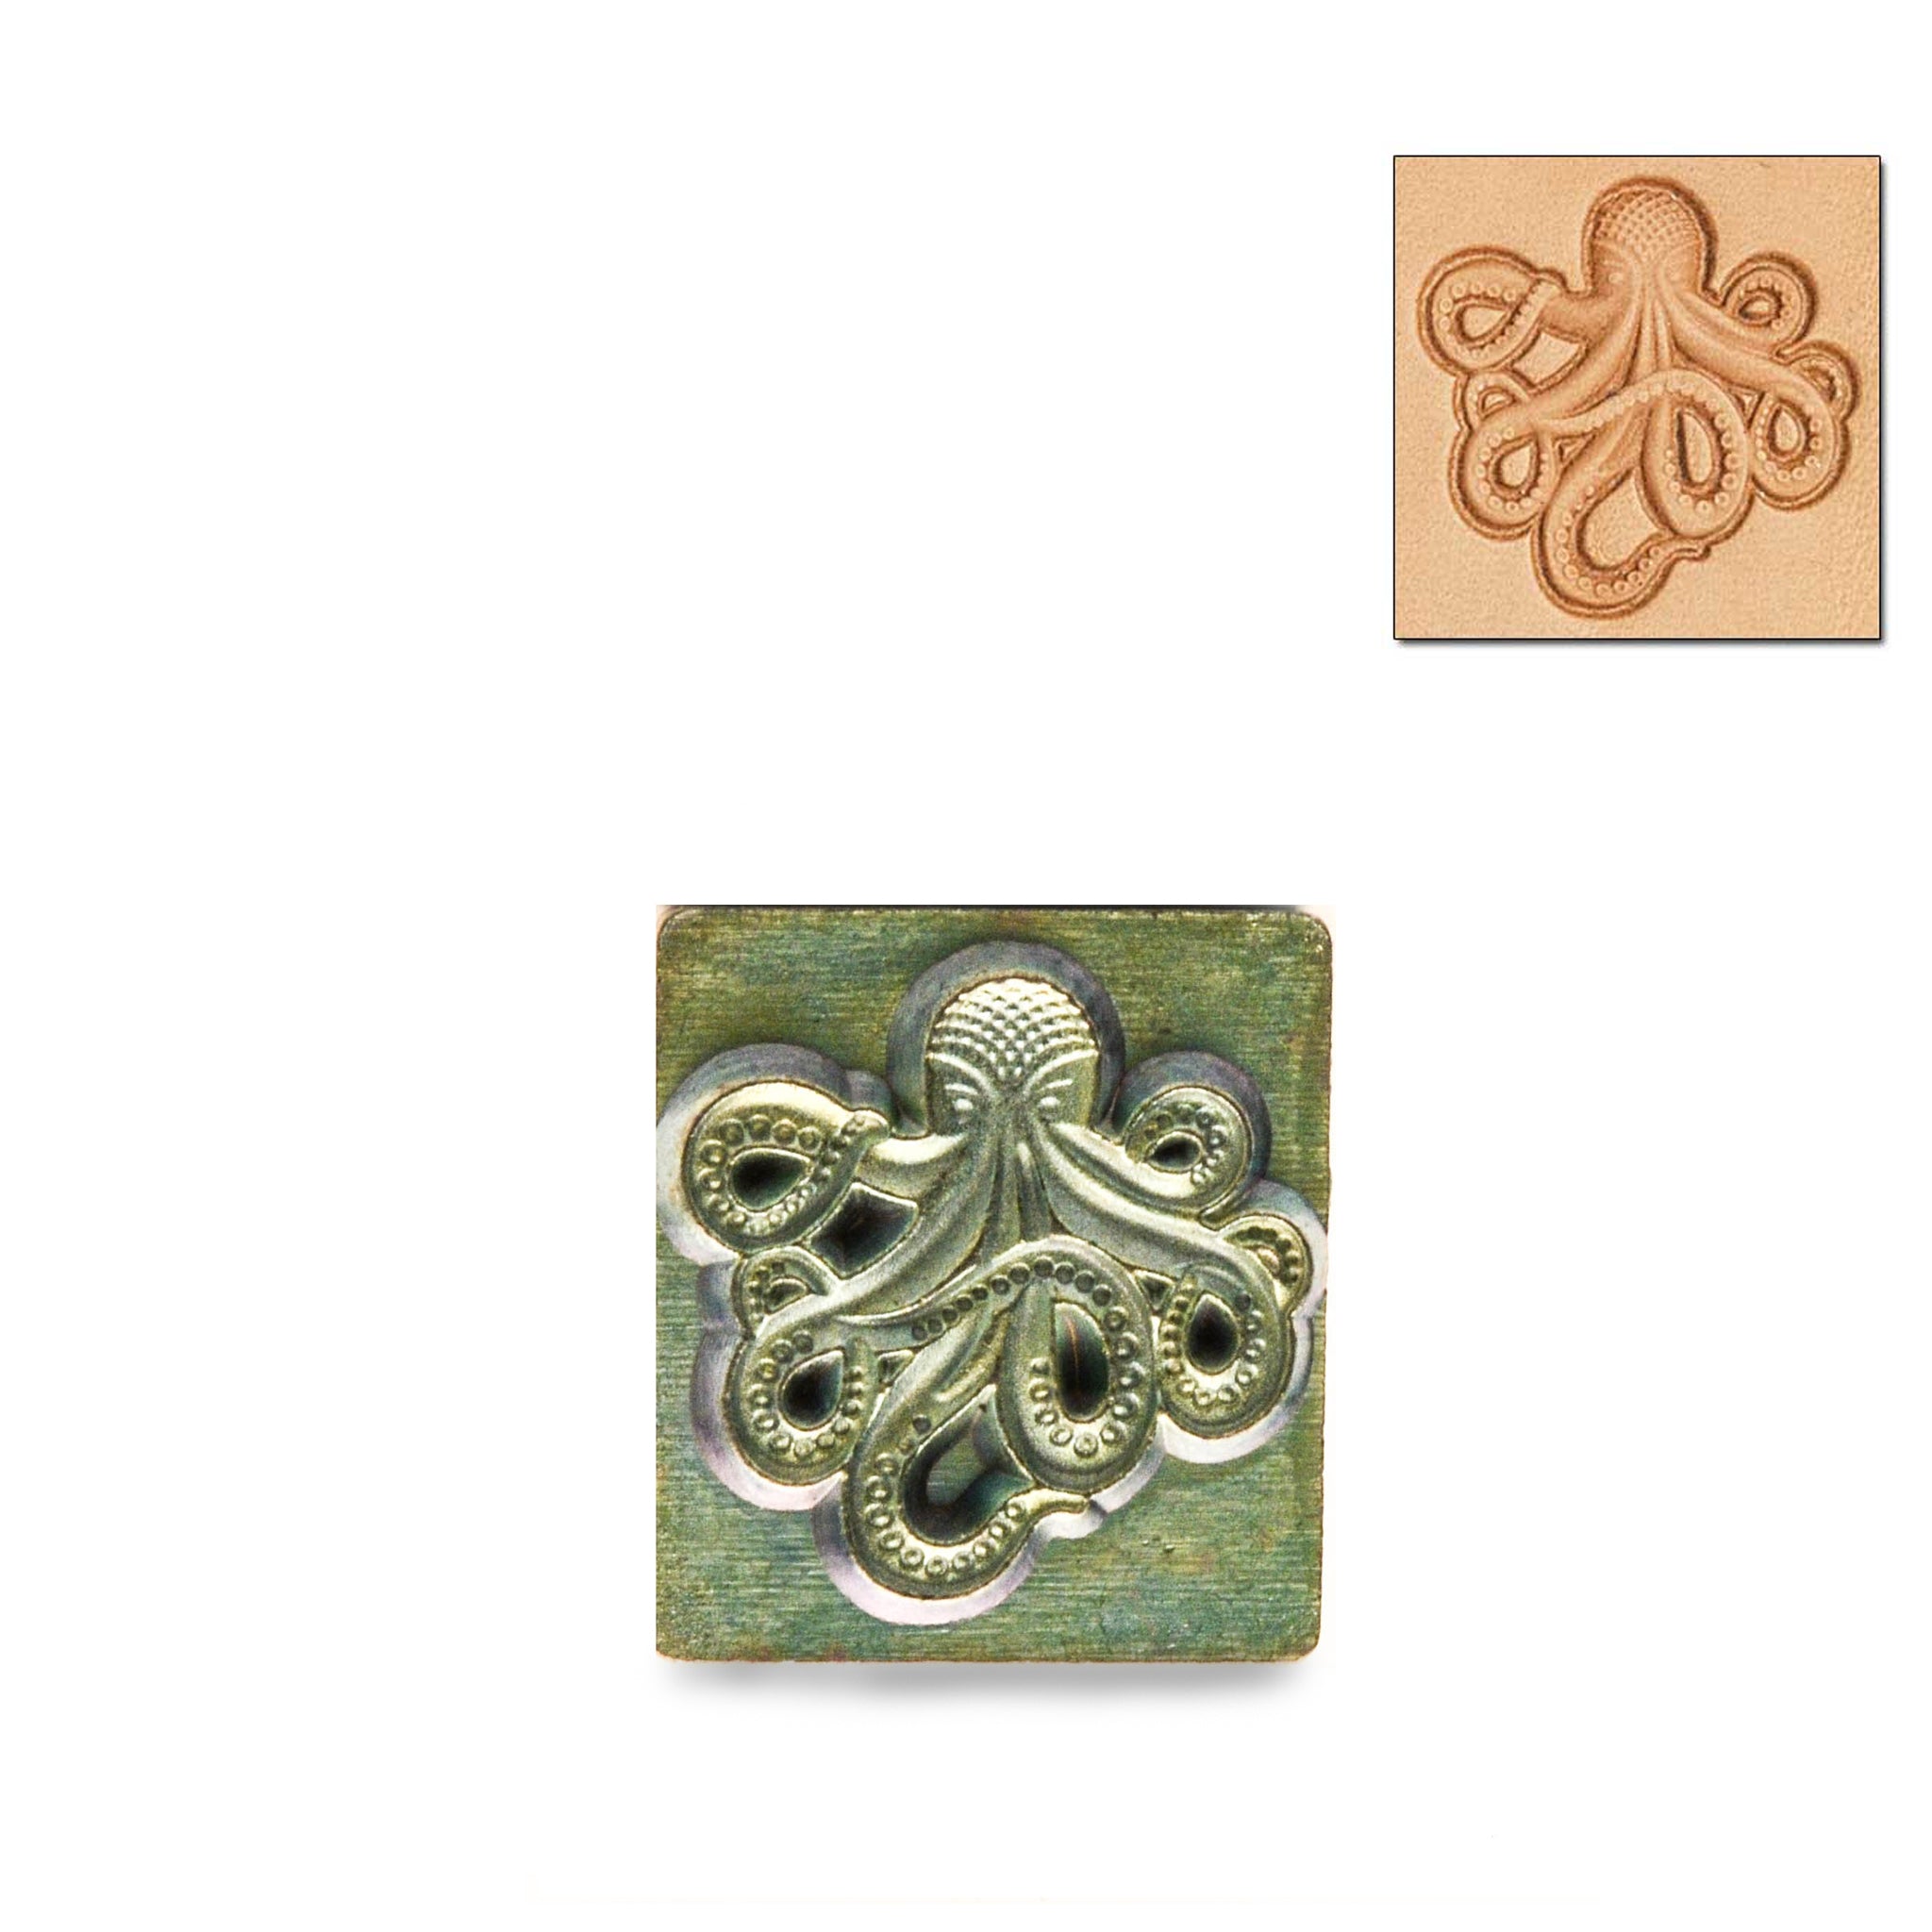 Steampunk Kraken/Octopus 3D Embossing Stamp from Identity Leathercraft